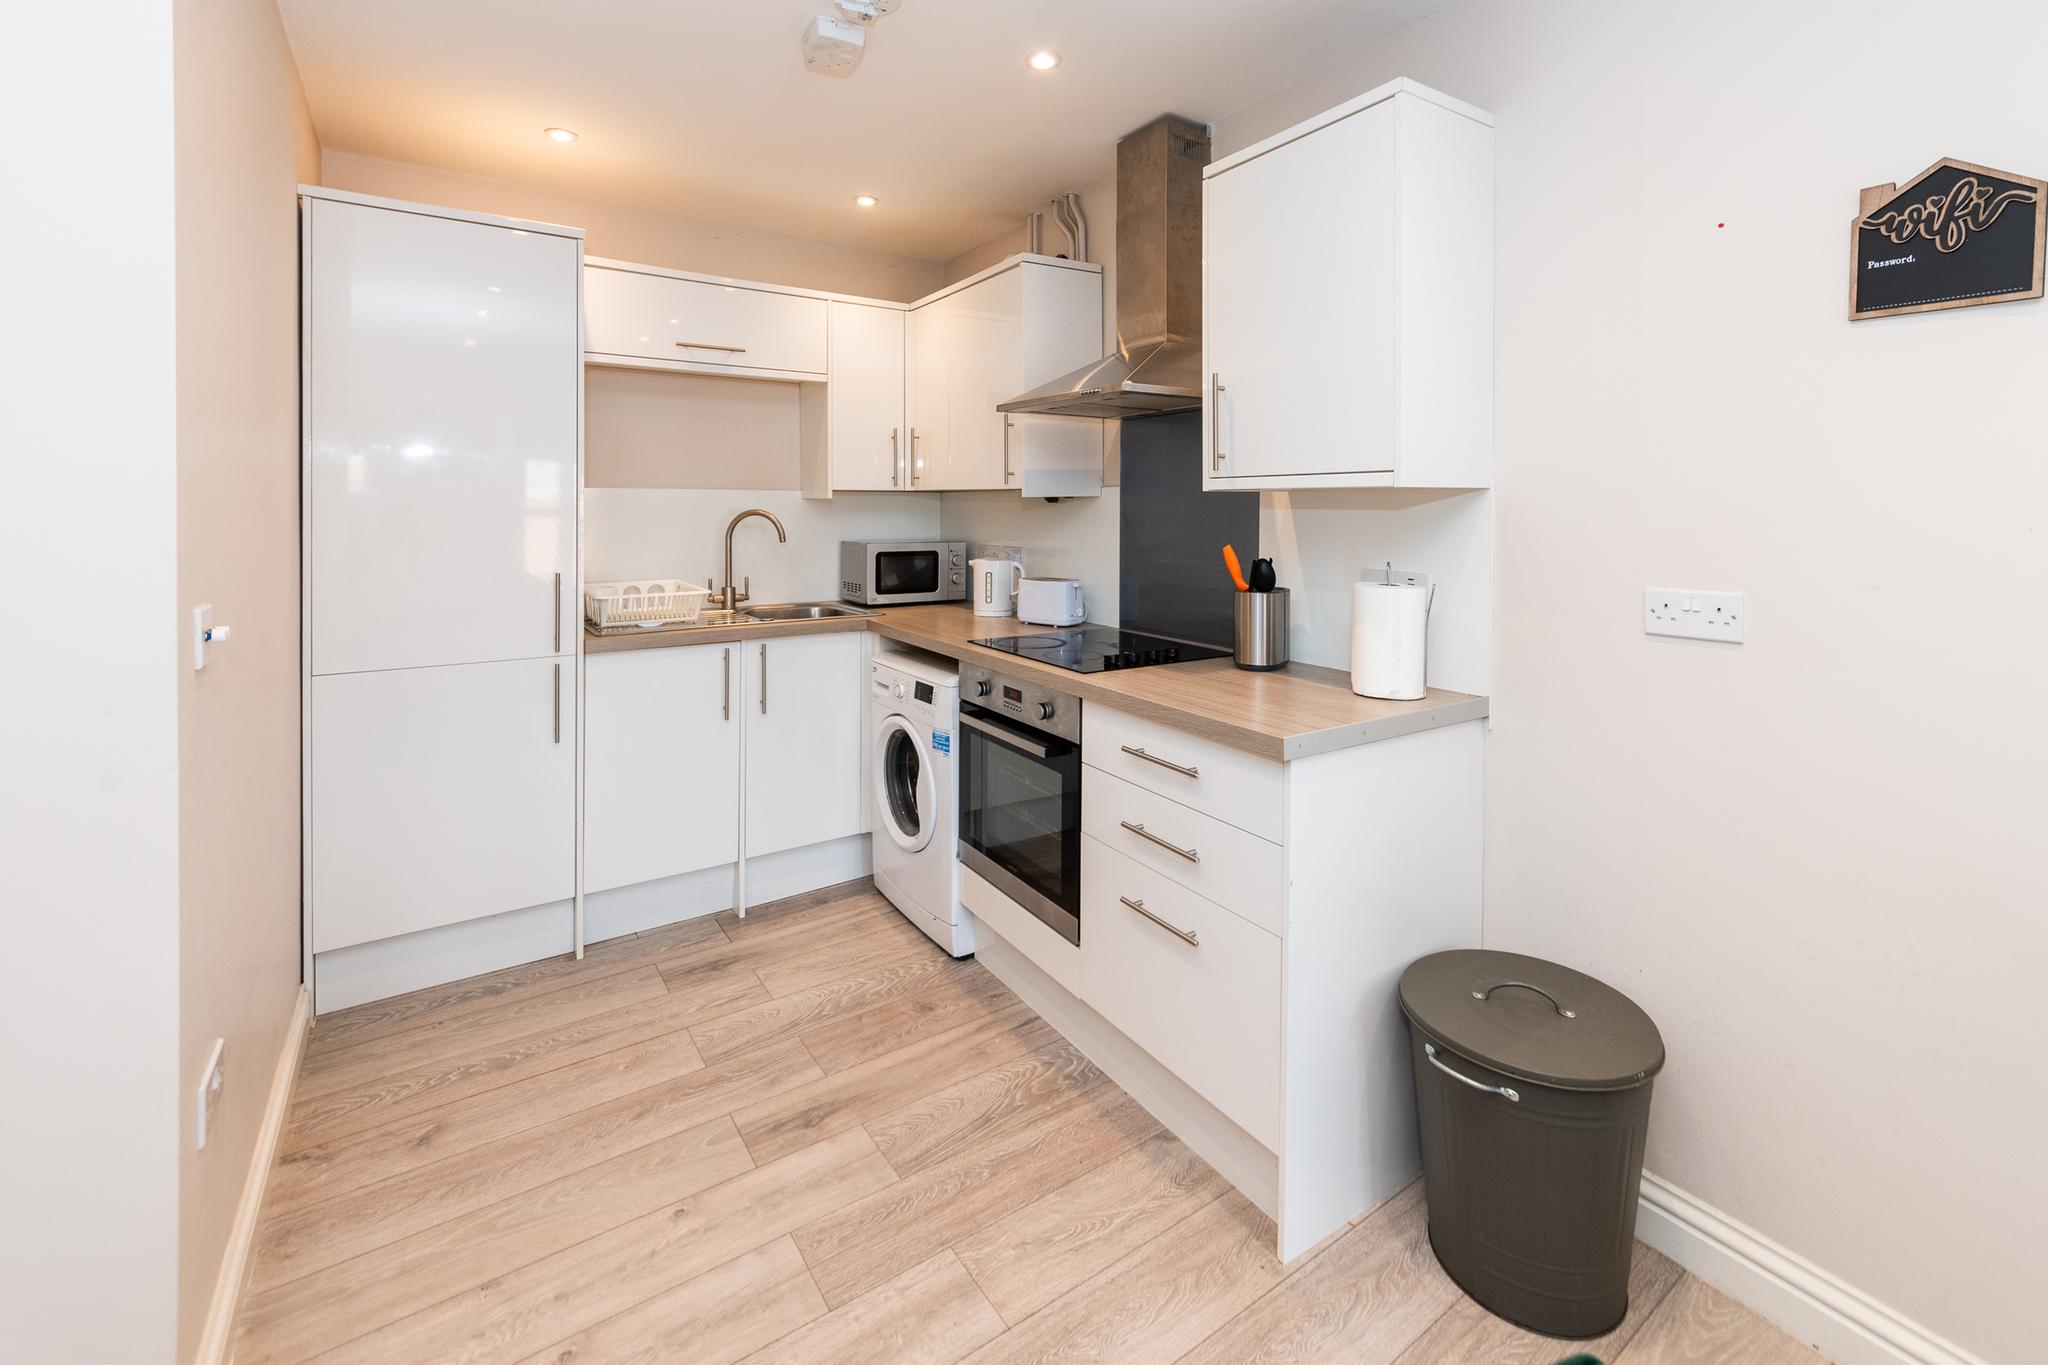 2 Beds| Fully Equipped Flat for Short-Mid Stays2